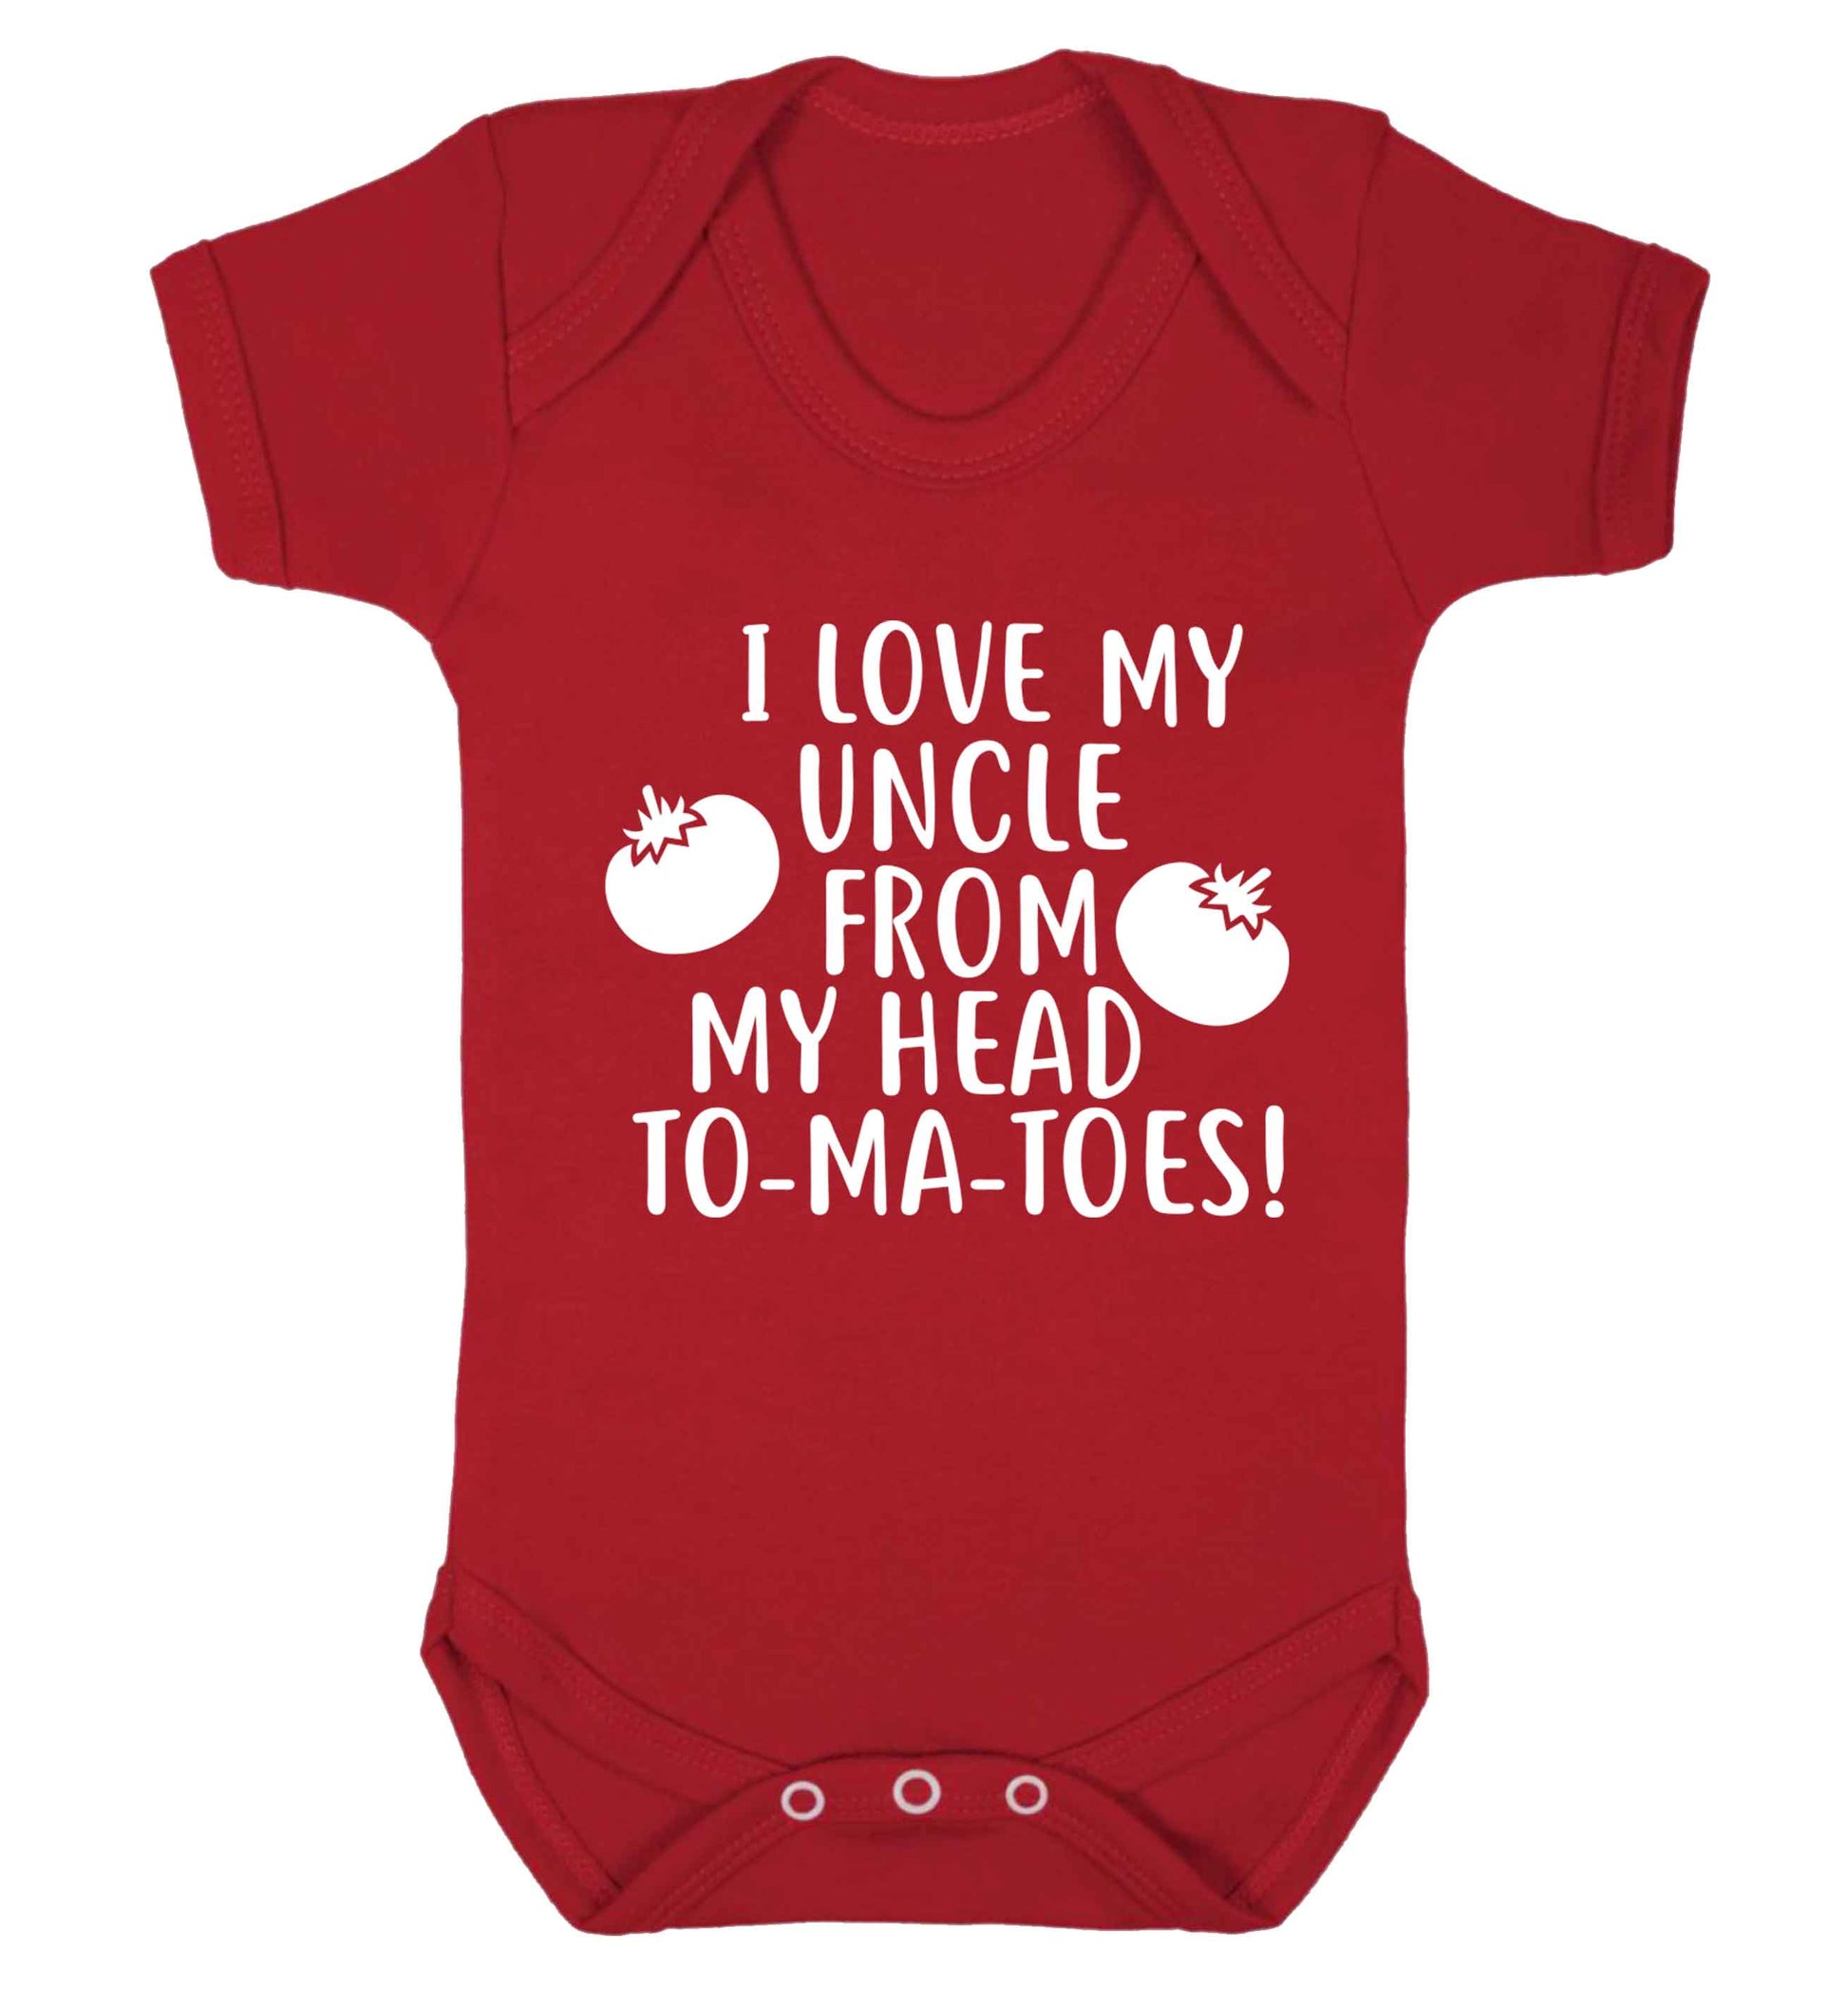 I love my uncle from my head To-Ma-Toes Baby Vest red 18-24 months